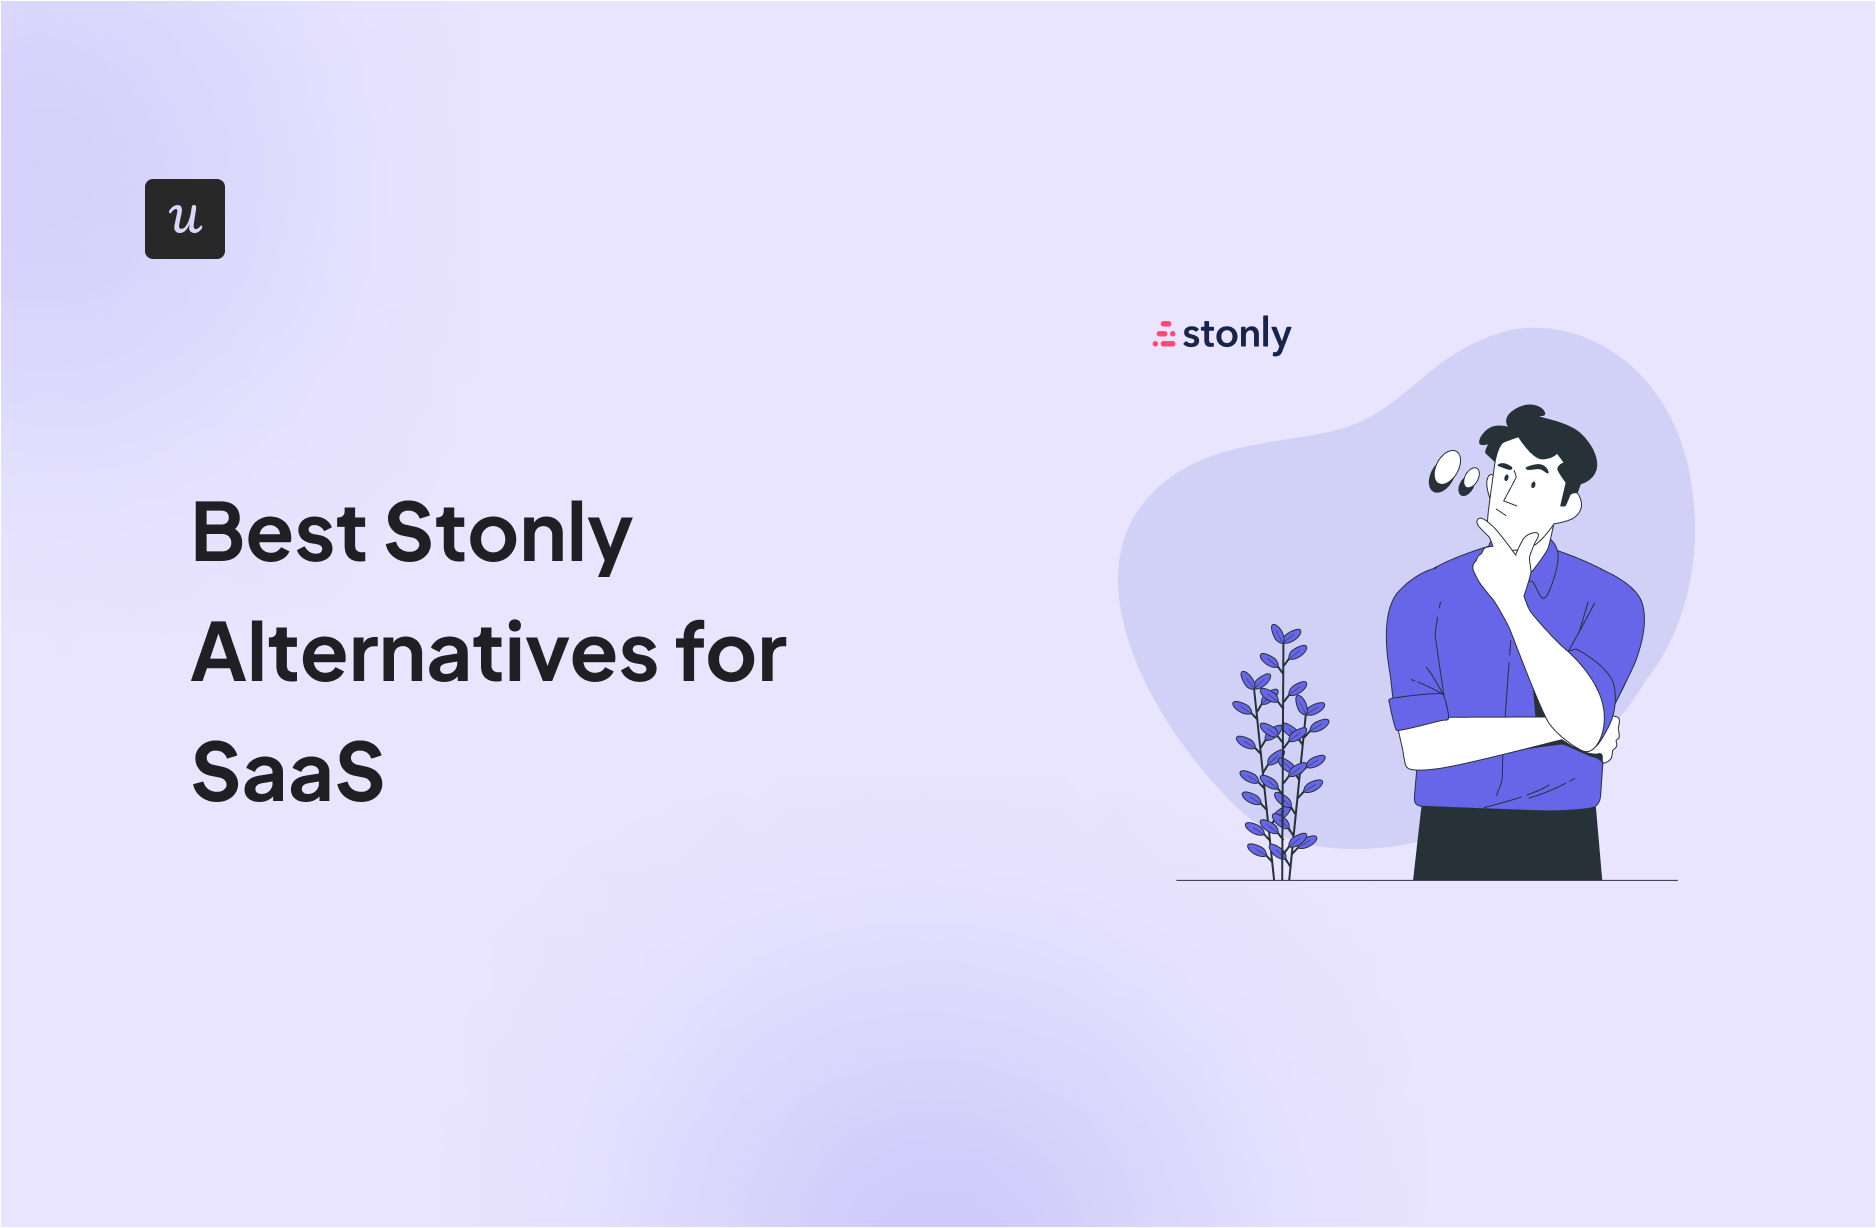 Best Stonly Alternatives for SaaS